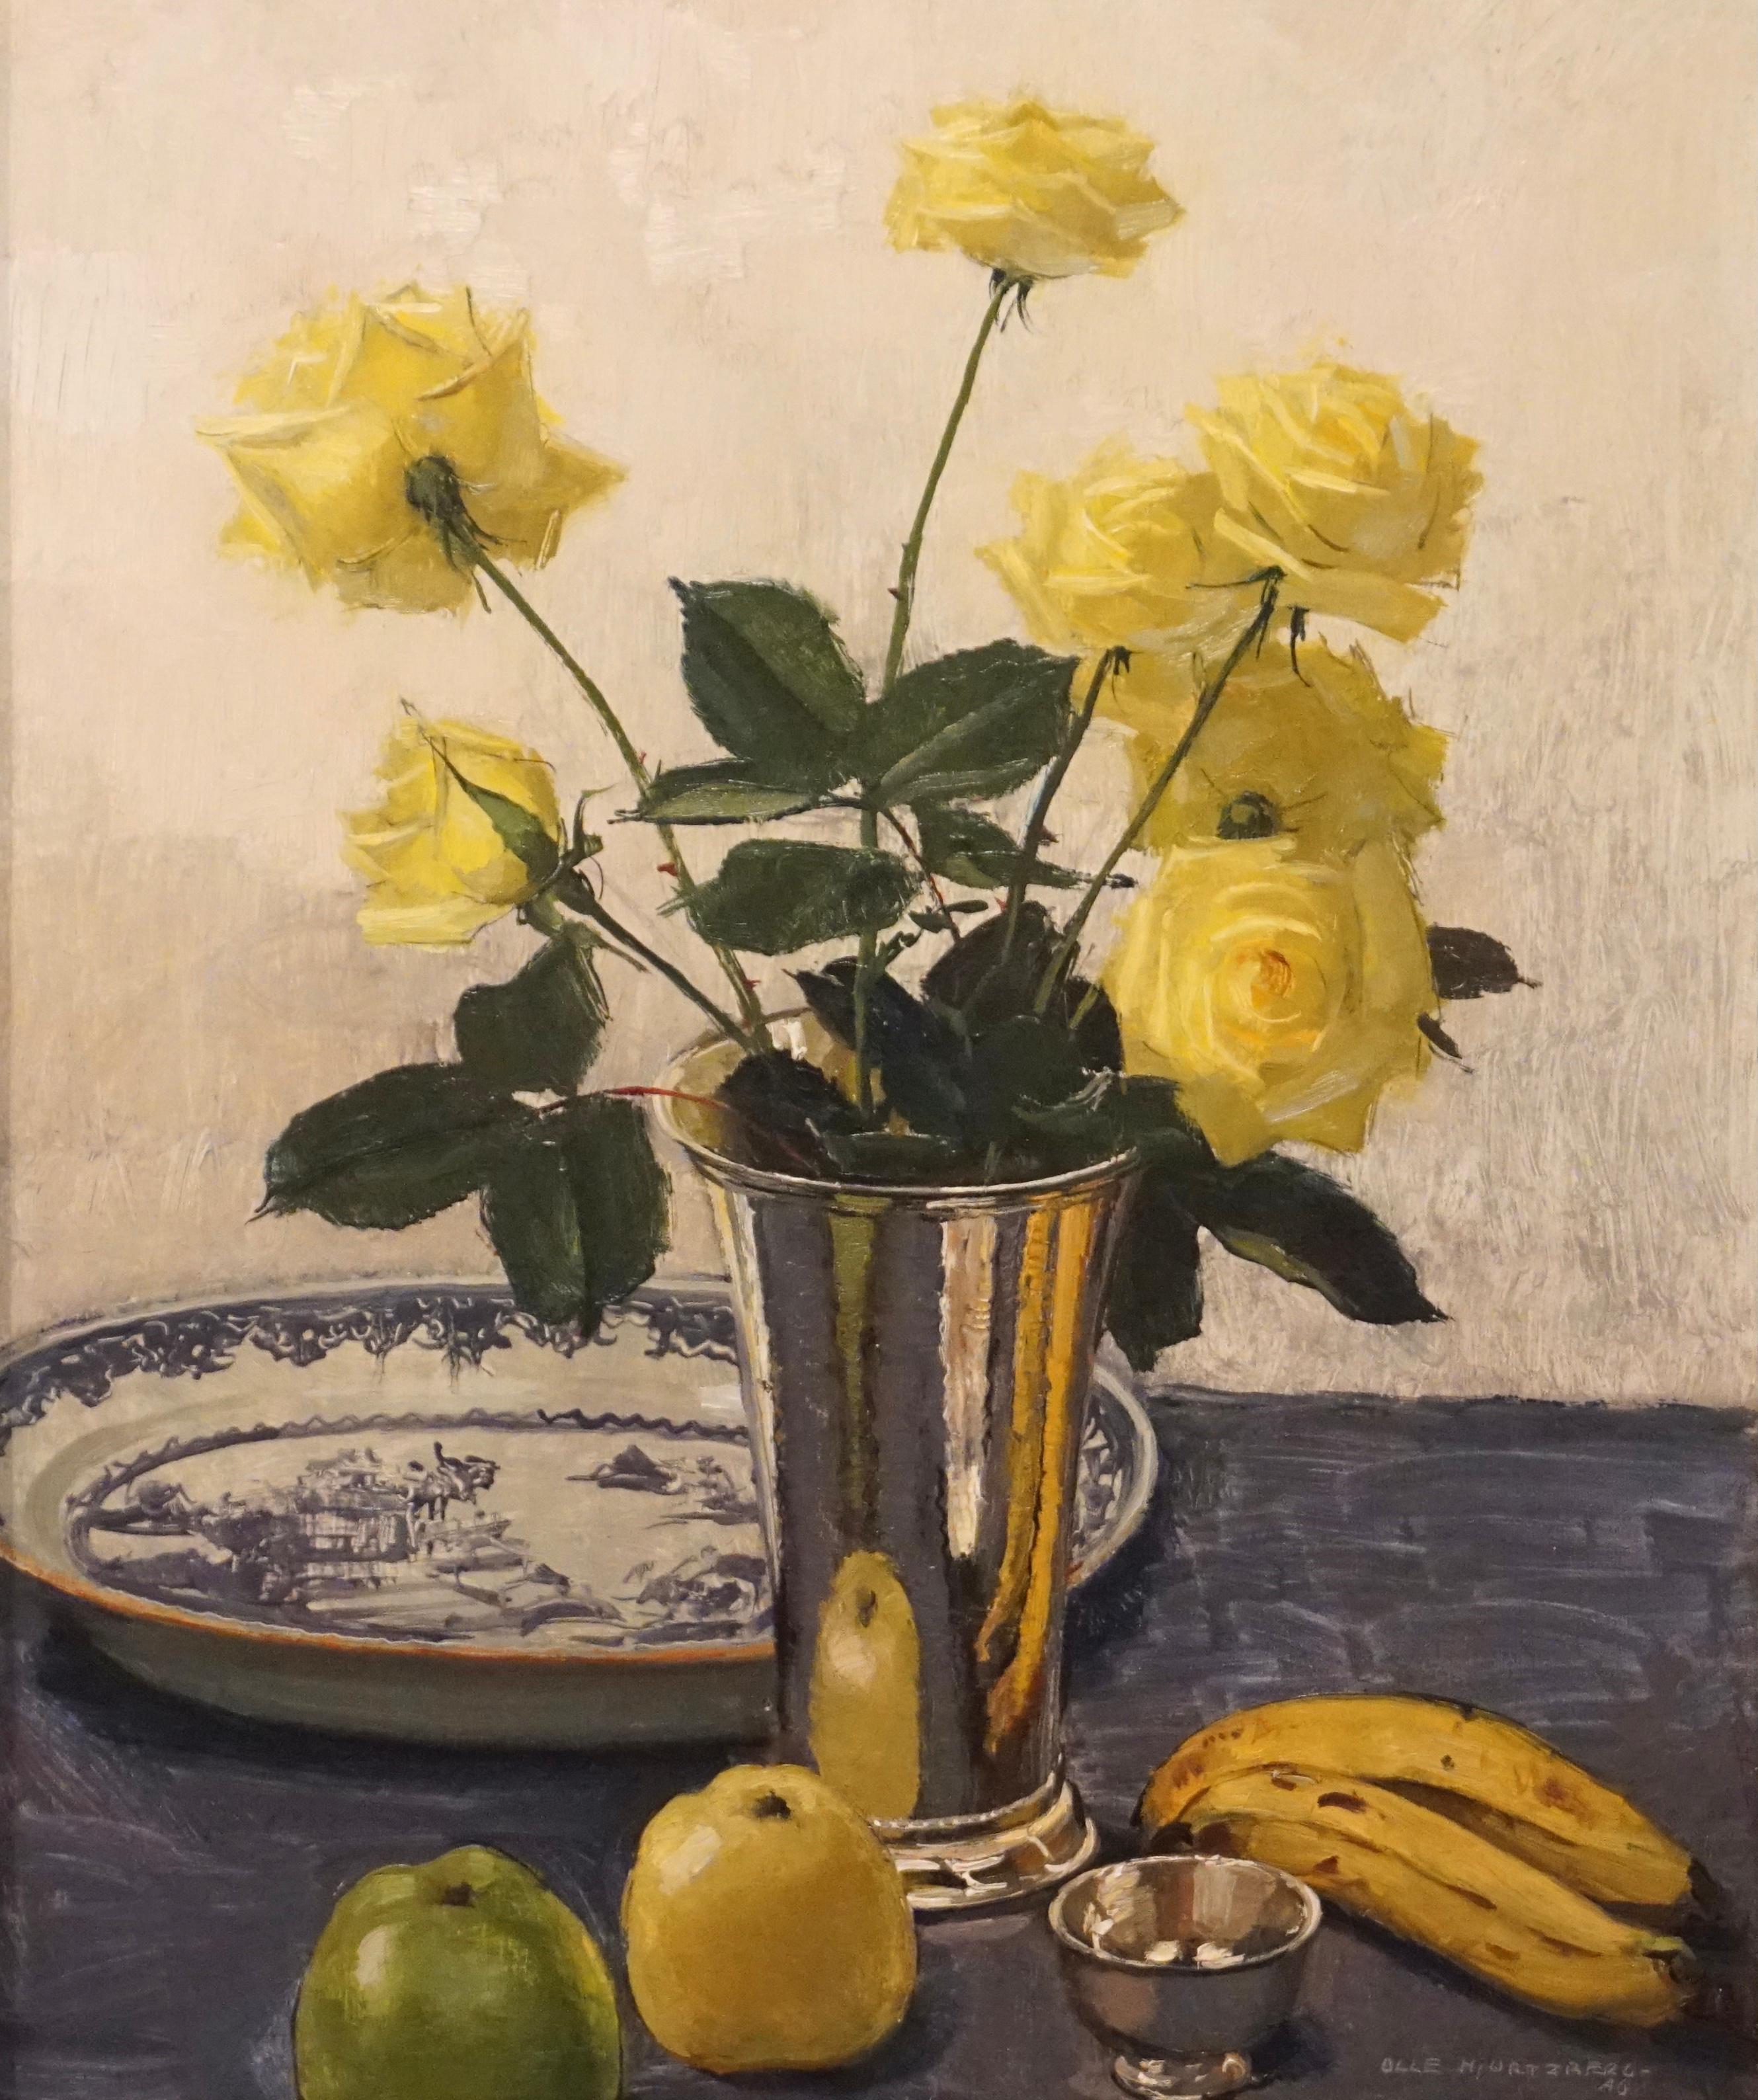 Olle Hjortzberg (Swedish, 1872-1959)
Stilleben met gula rosor (Still life with yellow roses), 1946
Oil on Masonite

Sight: 25-1/2 x 21-1/4 inches (64.8 x 54.0 cm)
Framed: 35 X 30.25 X 2.5 Inches

Signed and dated lower right: Olle Hjortzberg /